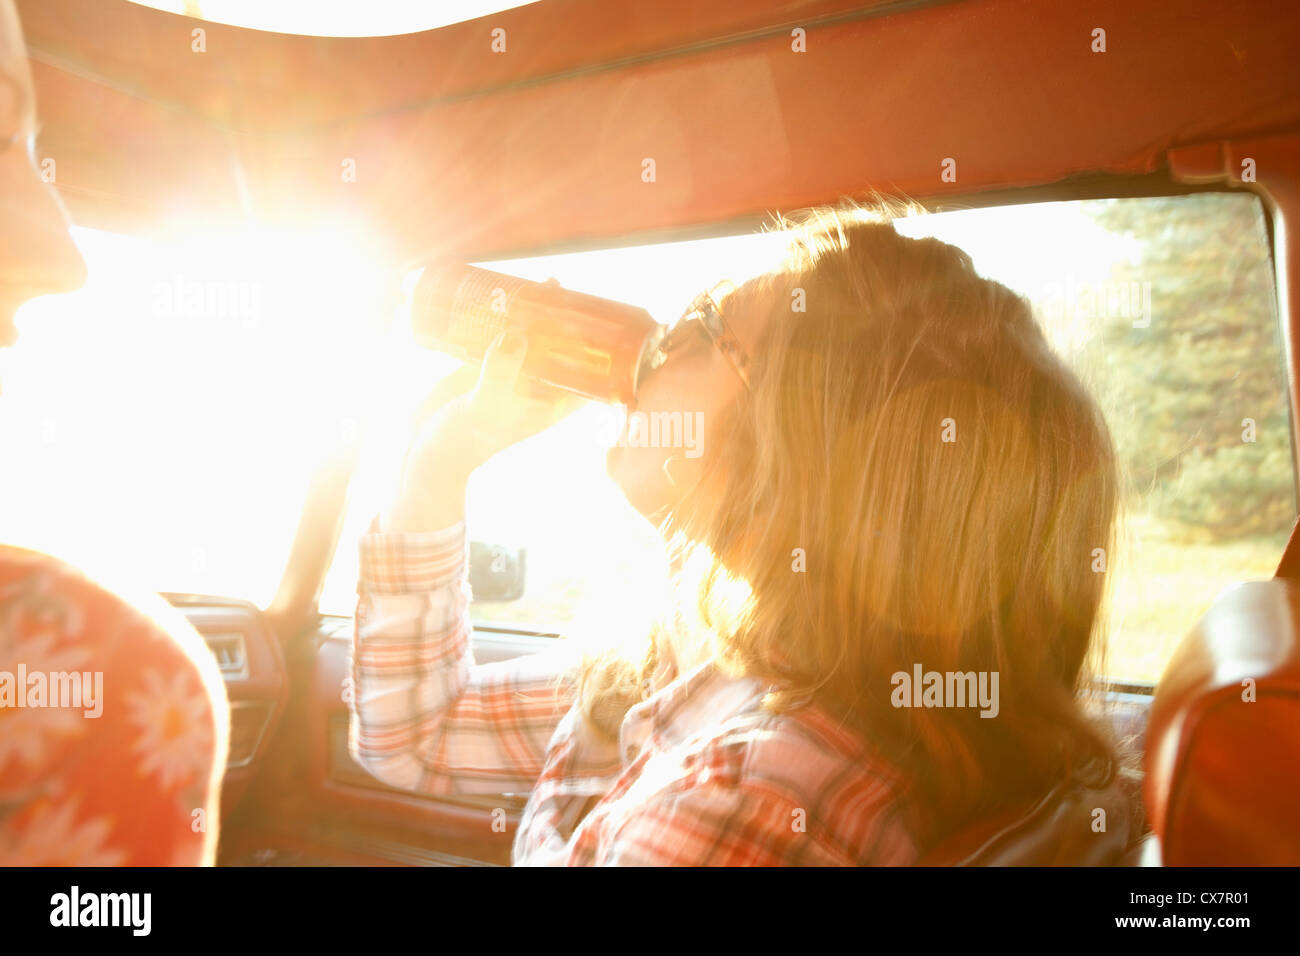 A woman drinking from a can while sitting in the passenger seat of vintage car Stock Photo